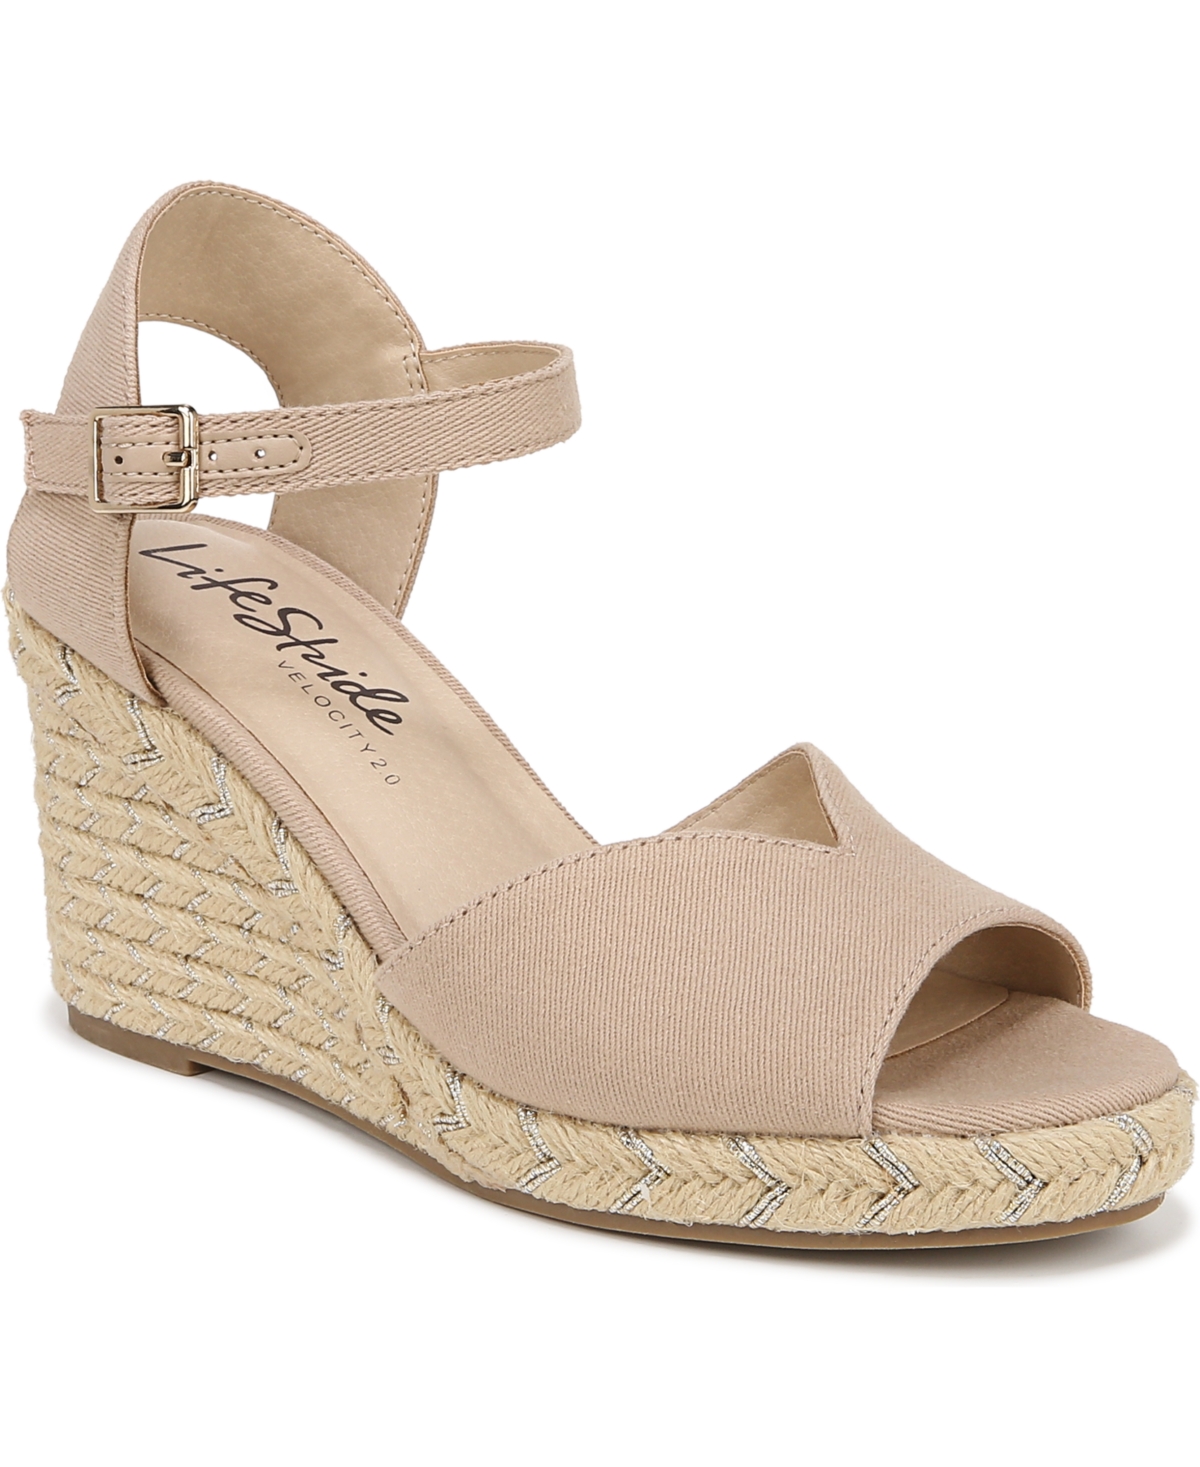 Women's Tess Espadrille Wedge Sandals - Platino Gold Faux Leather